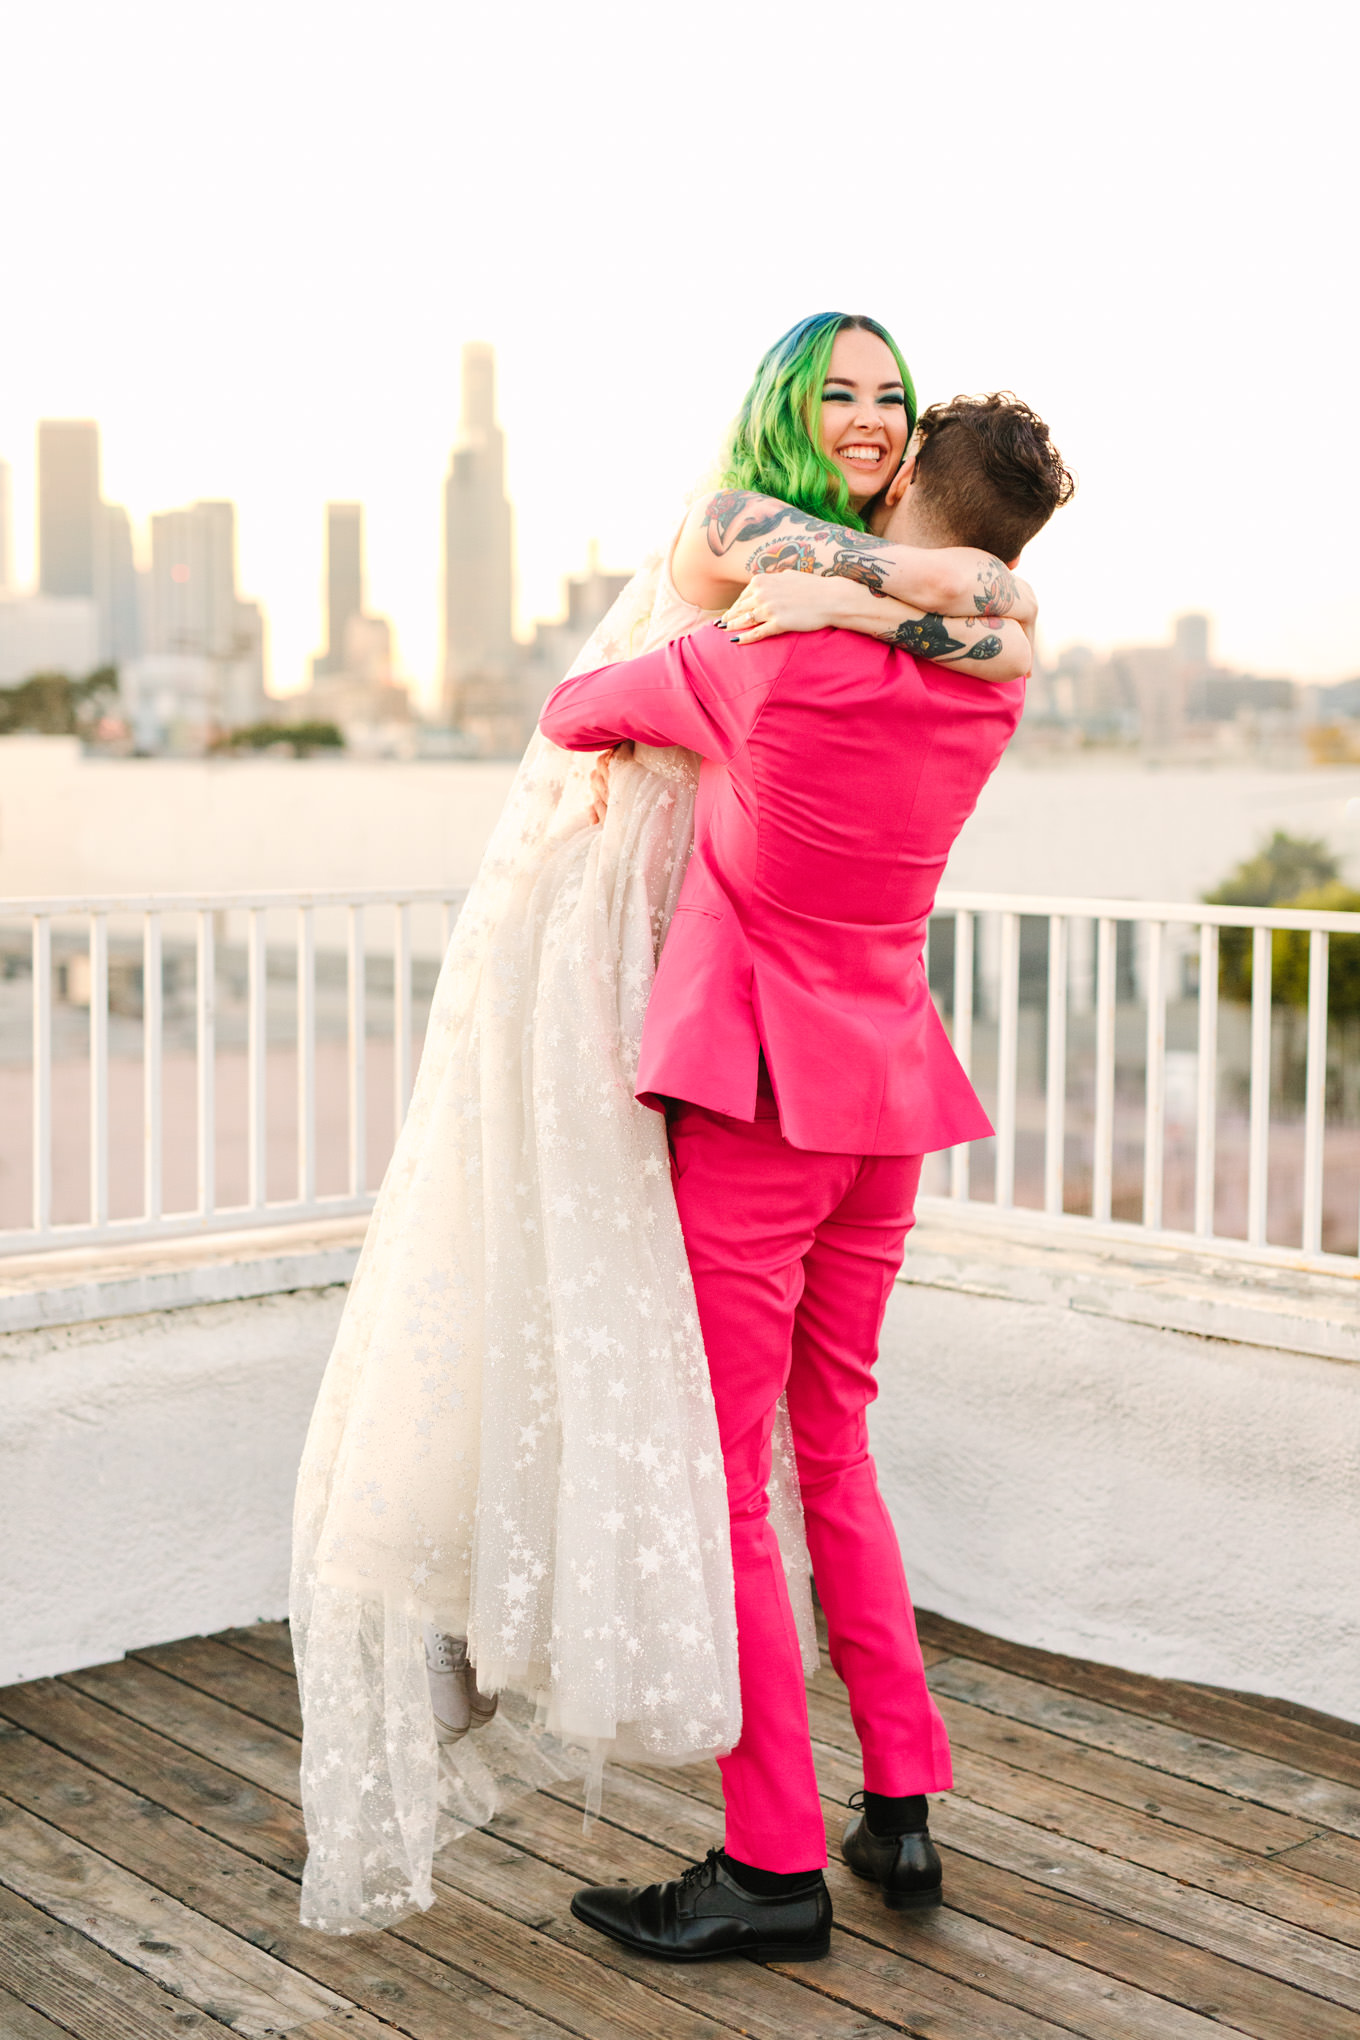 Groom in hot pink suit hugging bride with green hair on LA rooftop | Colorful wedding at The Unique Space Los Angeles published in The Knot Magazine | Fresh and colorful photography for fun-loving couples in Southern California | #colorfulwedding #losangeleswedding #weddingphotography #uniquespace Source: Mary Costa Photography | Los Angeles